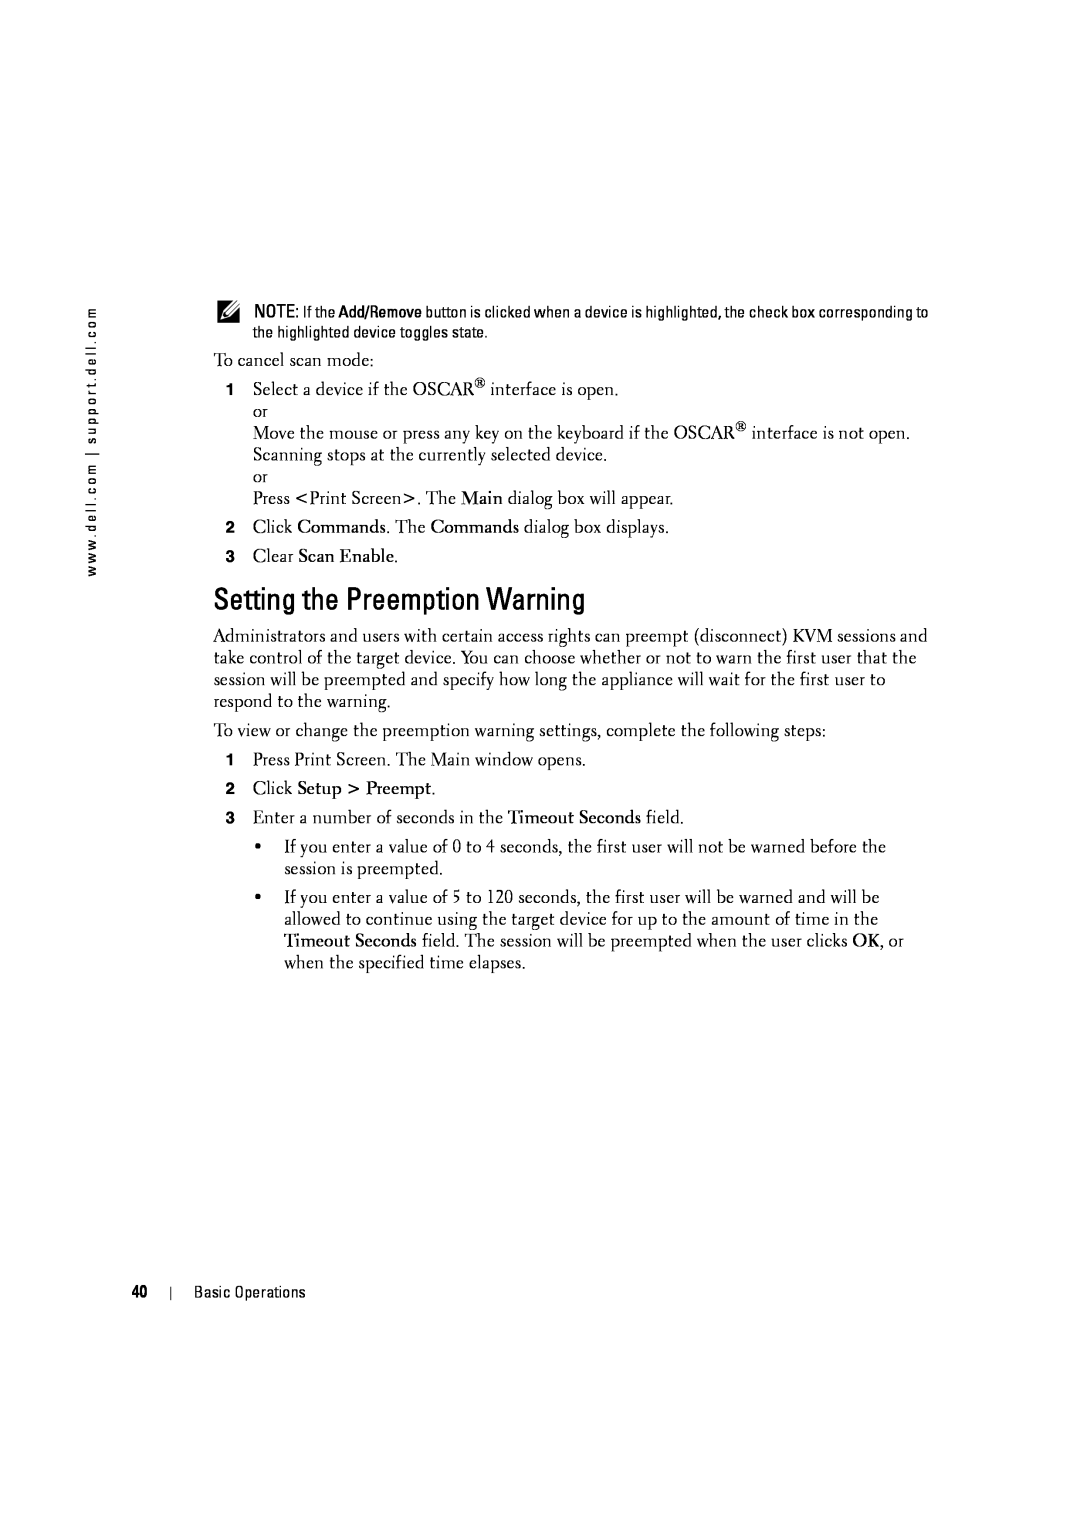 Dell 4161DS, 2161DS-2 manual Setting the Preemption Warning, Clear Scan Enable, Click Setup Preempt 